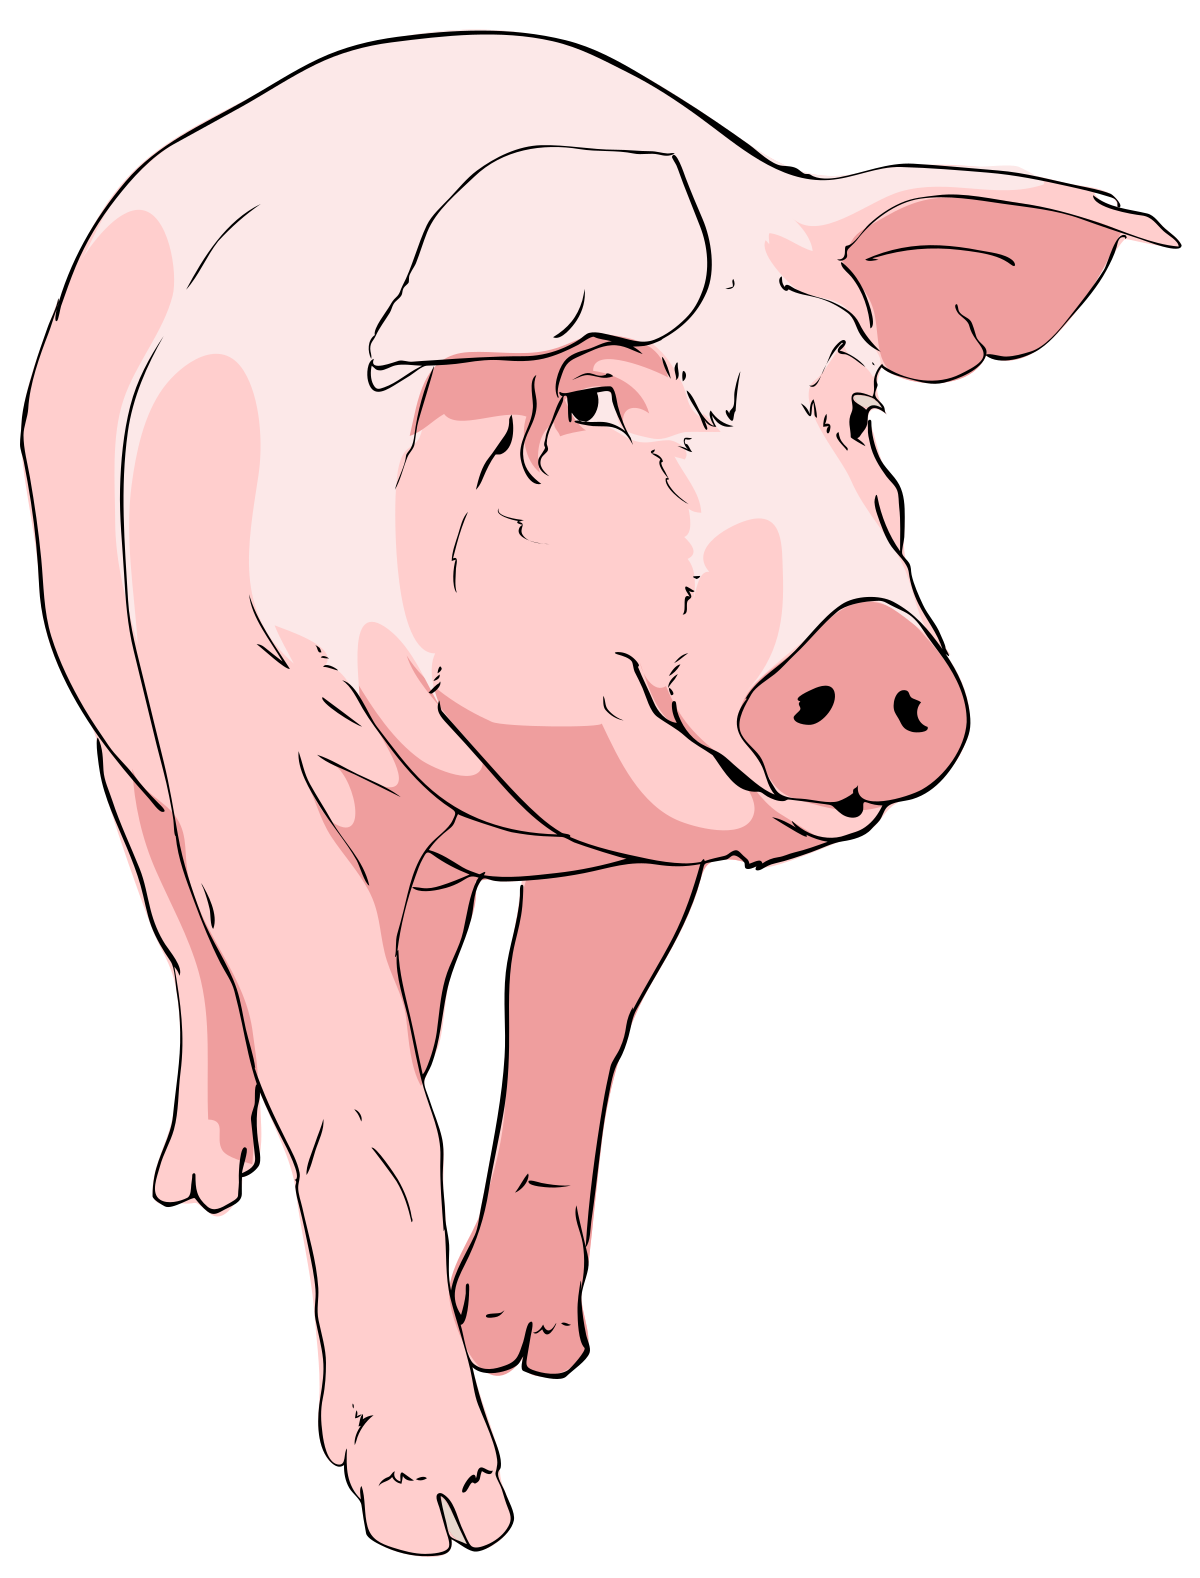 File:Pig clipart  - Wikipedia